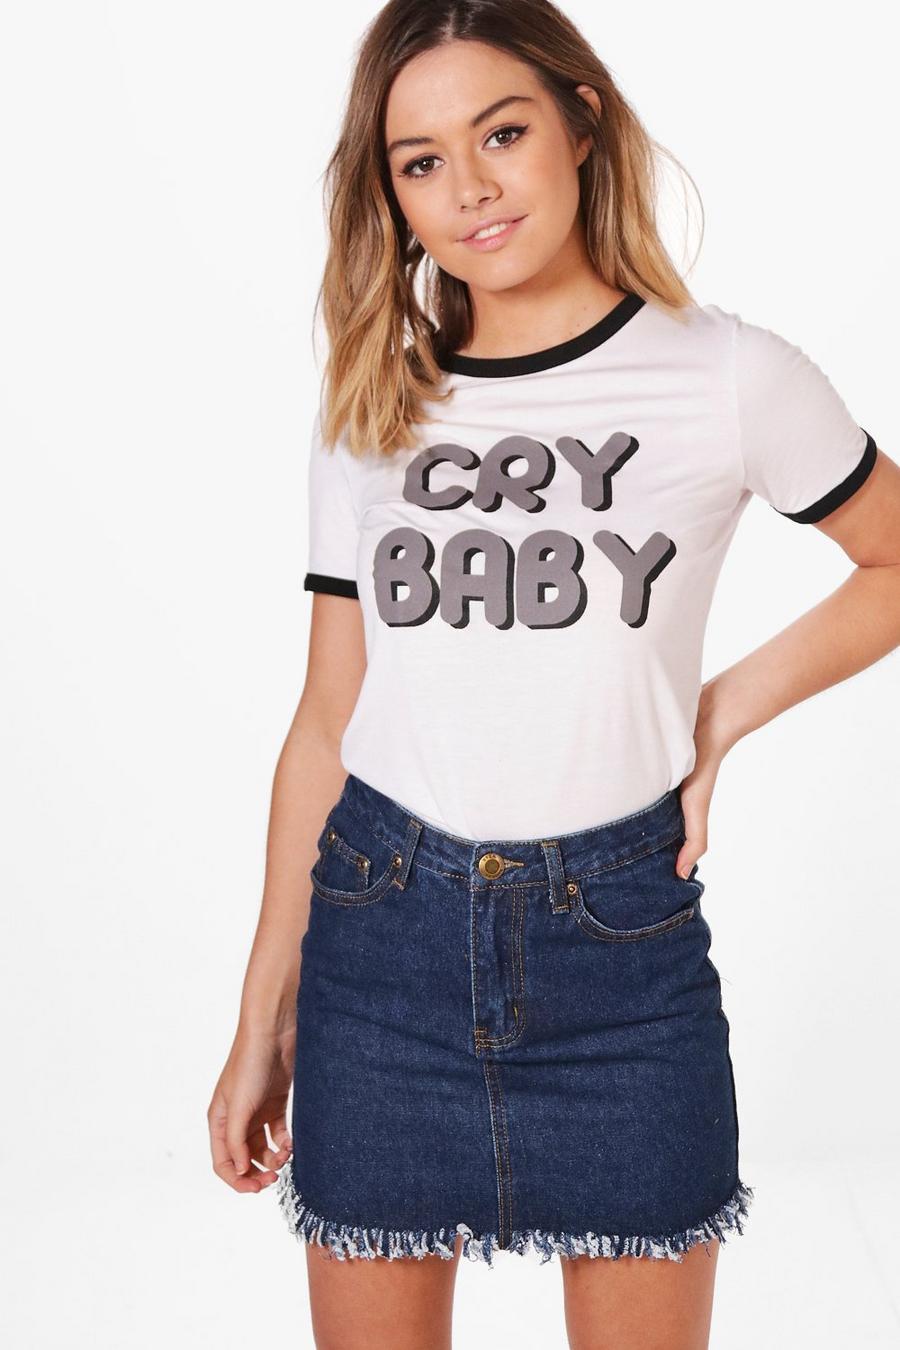 petite ally maglietta ringer con slogan 'cry baby' image number 1